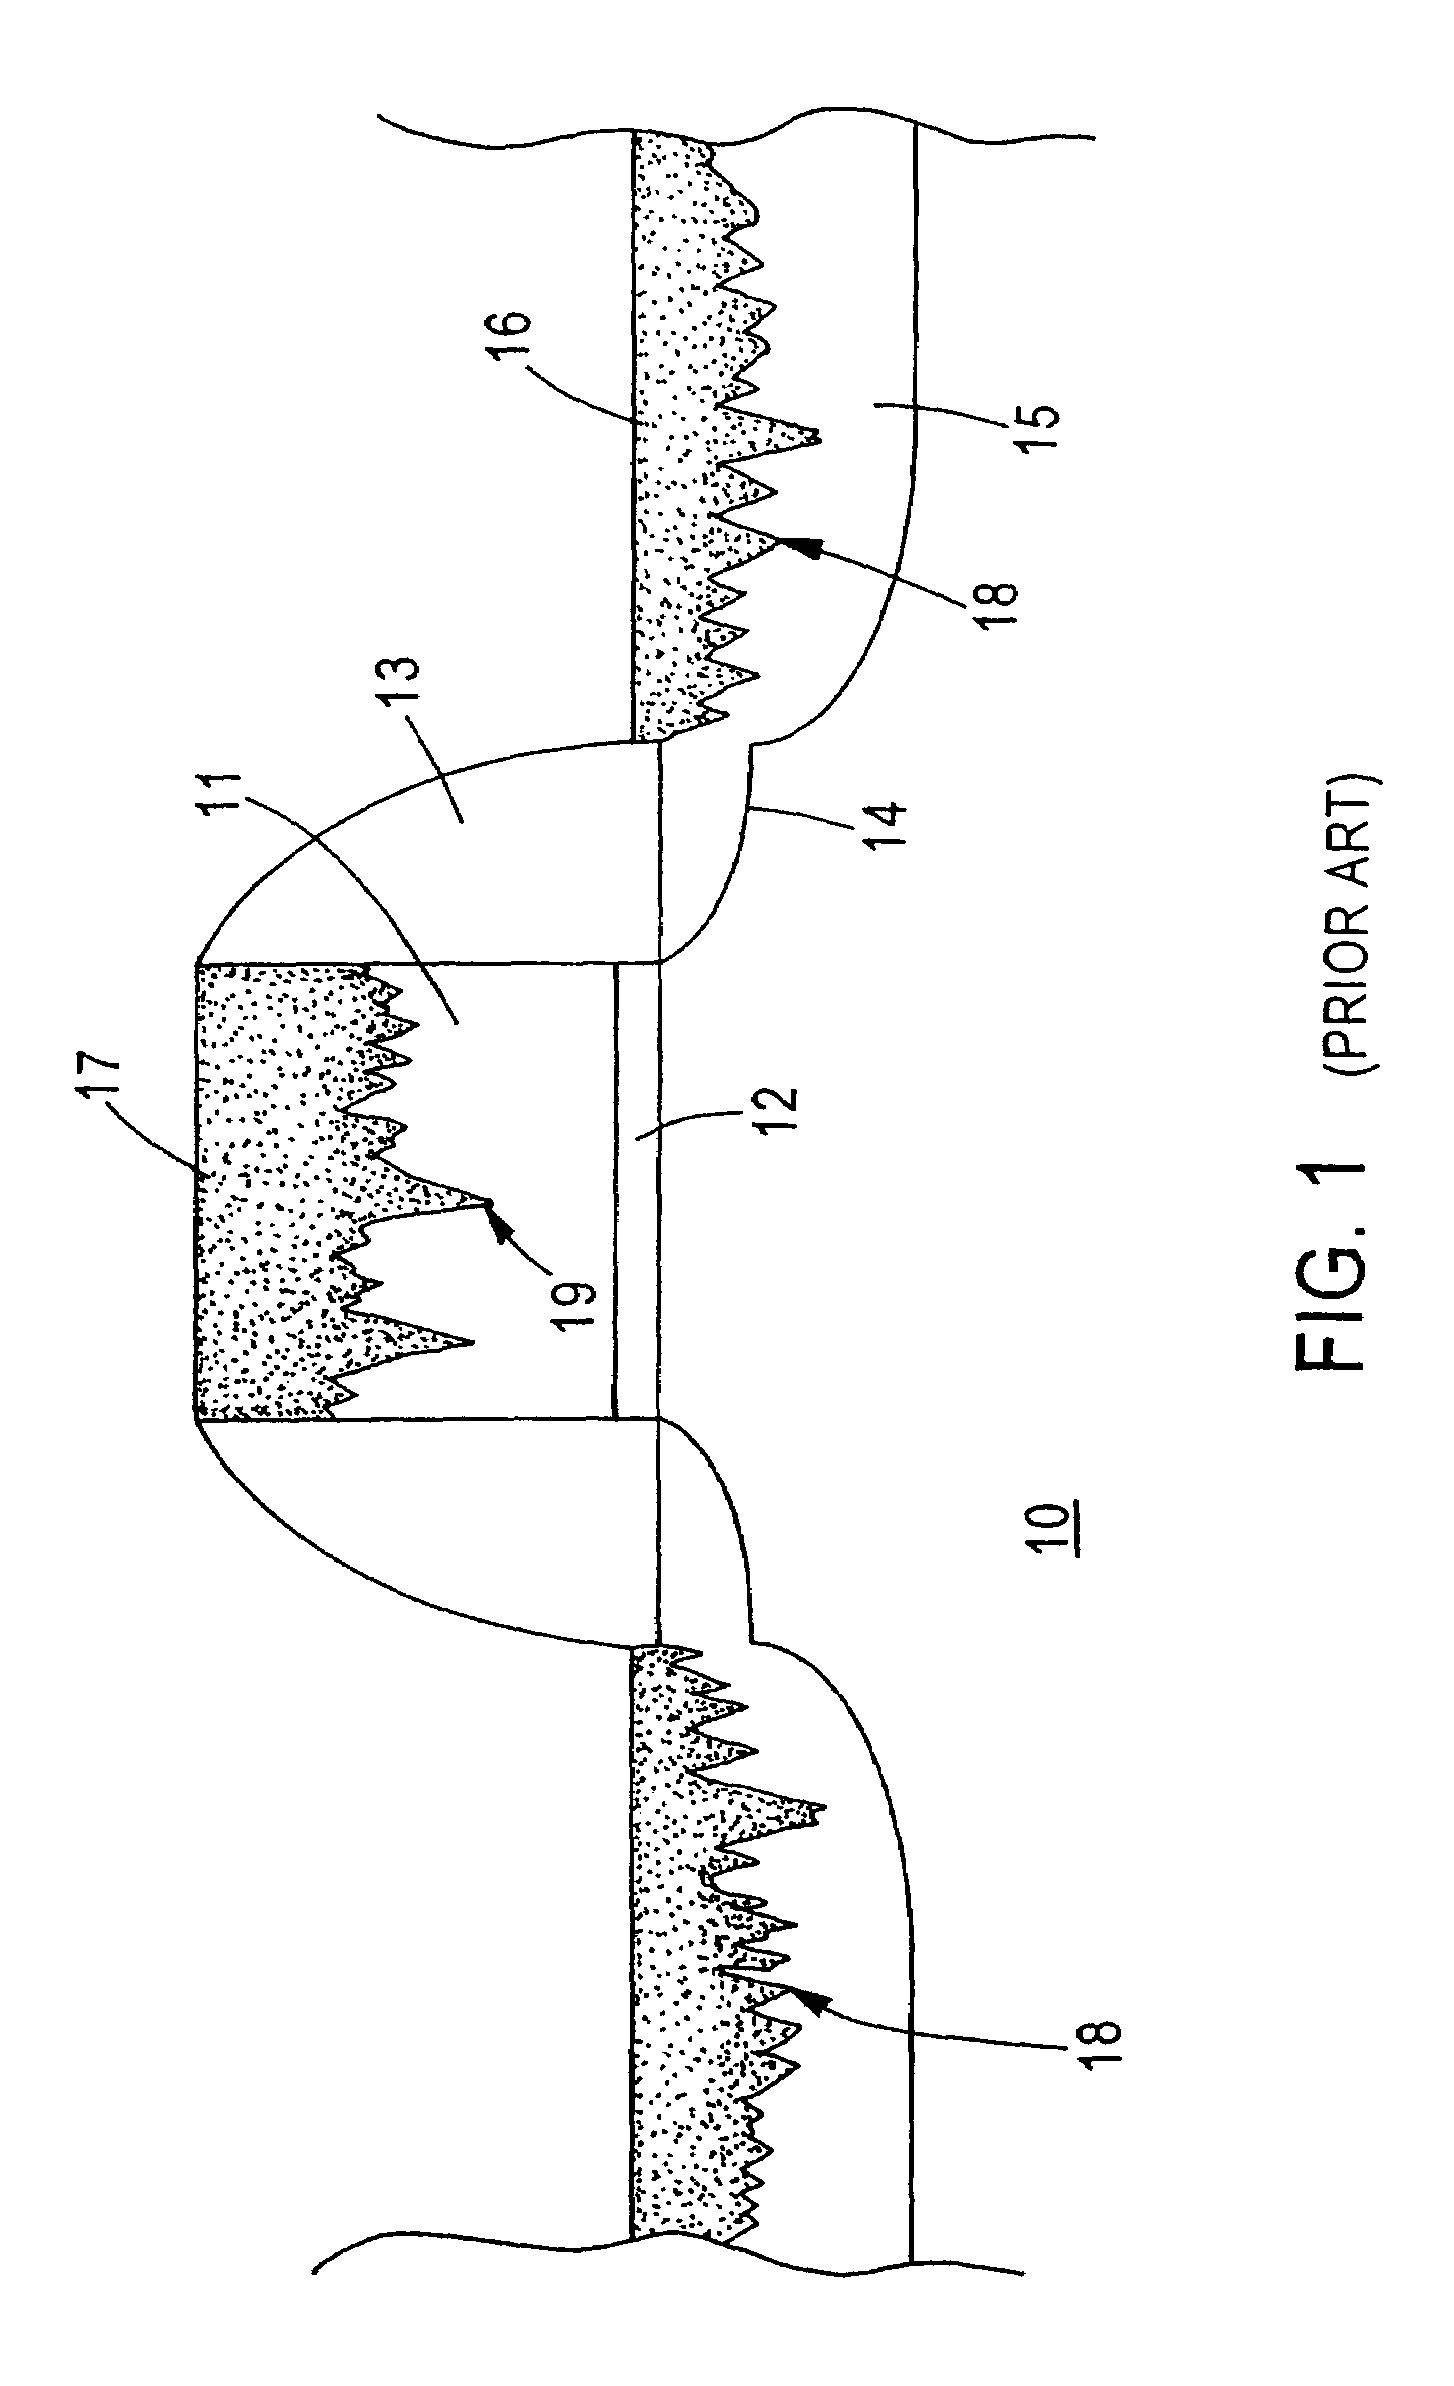 Method of manufacturing semiconductor device having nickel silicide with reduced interface roughness